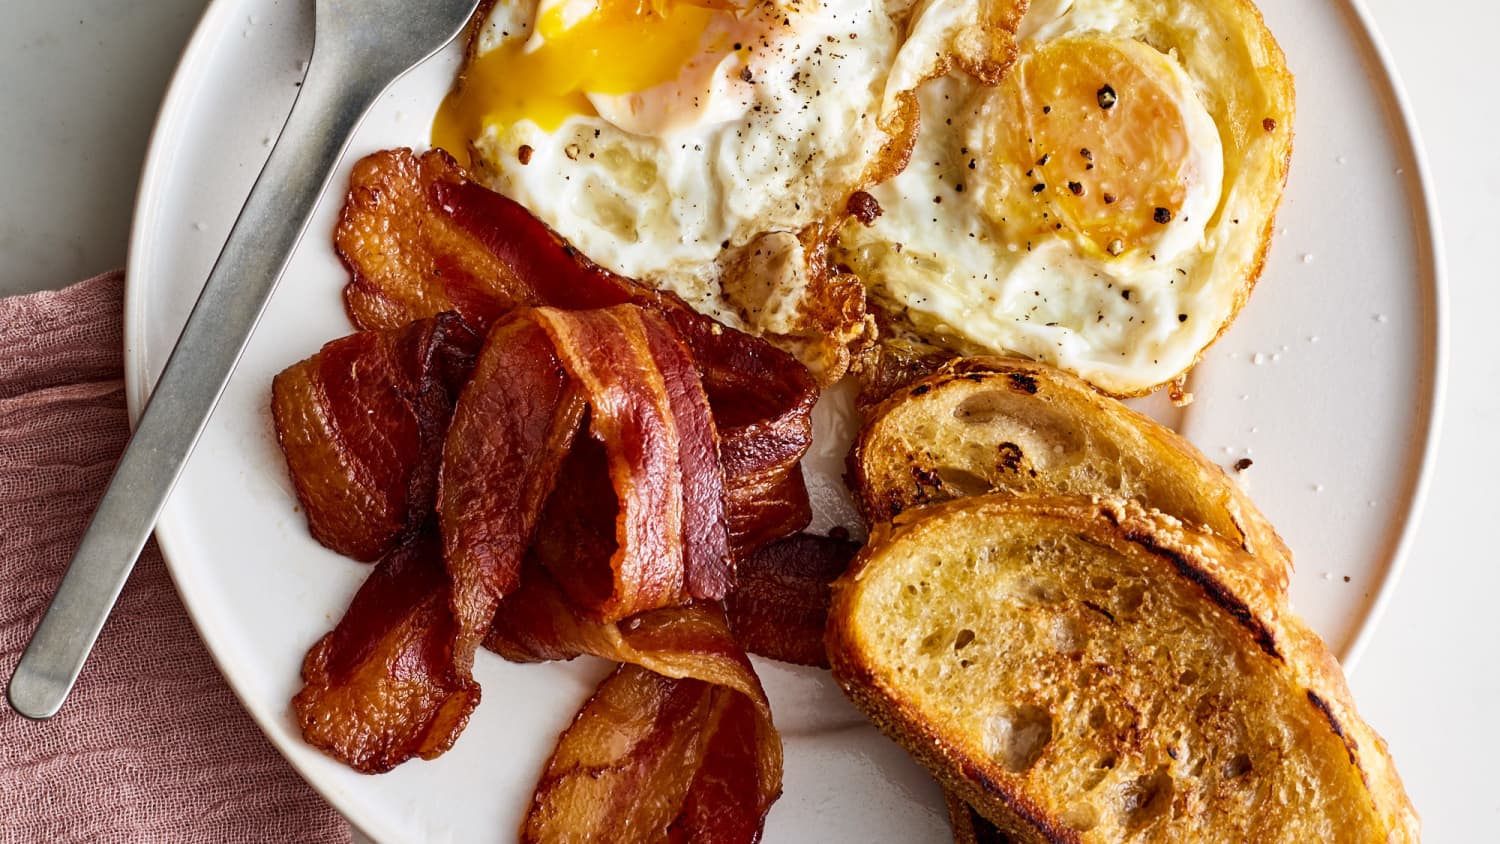 How To Make The Perfect Fried Egg – Leite's Culinaria